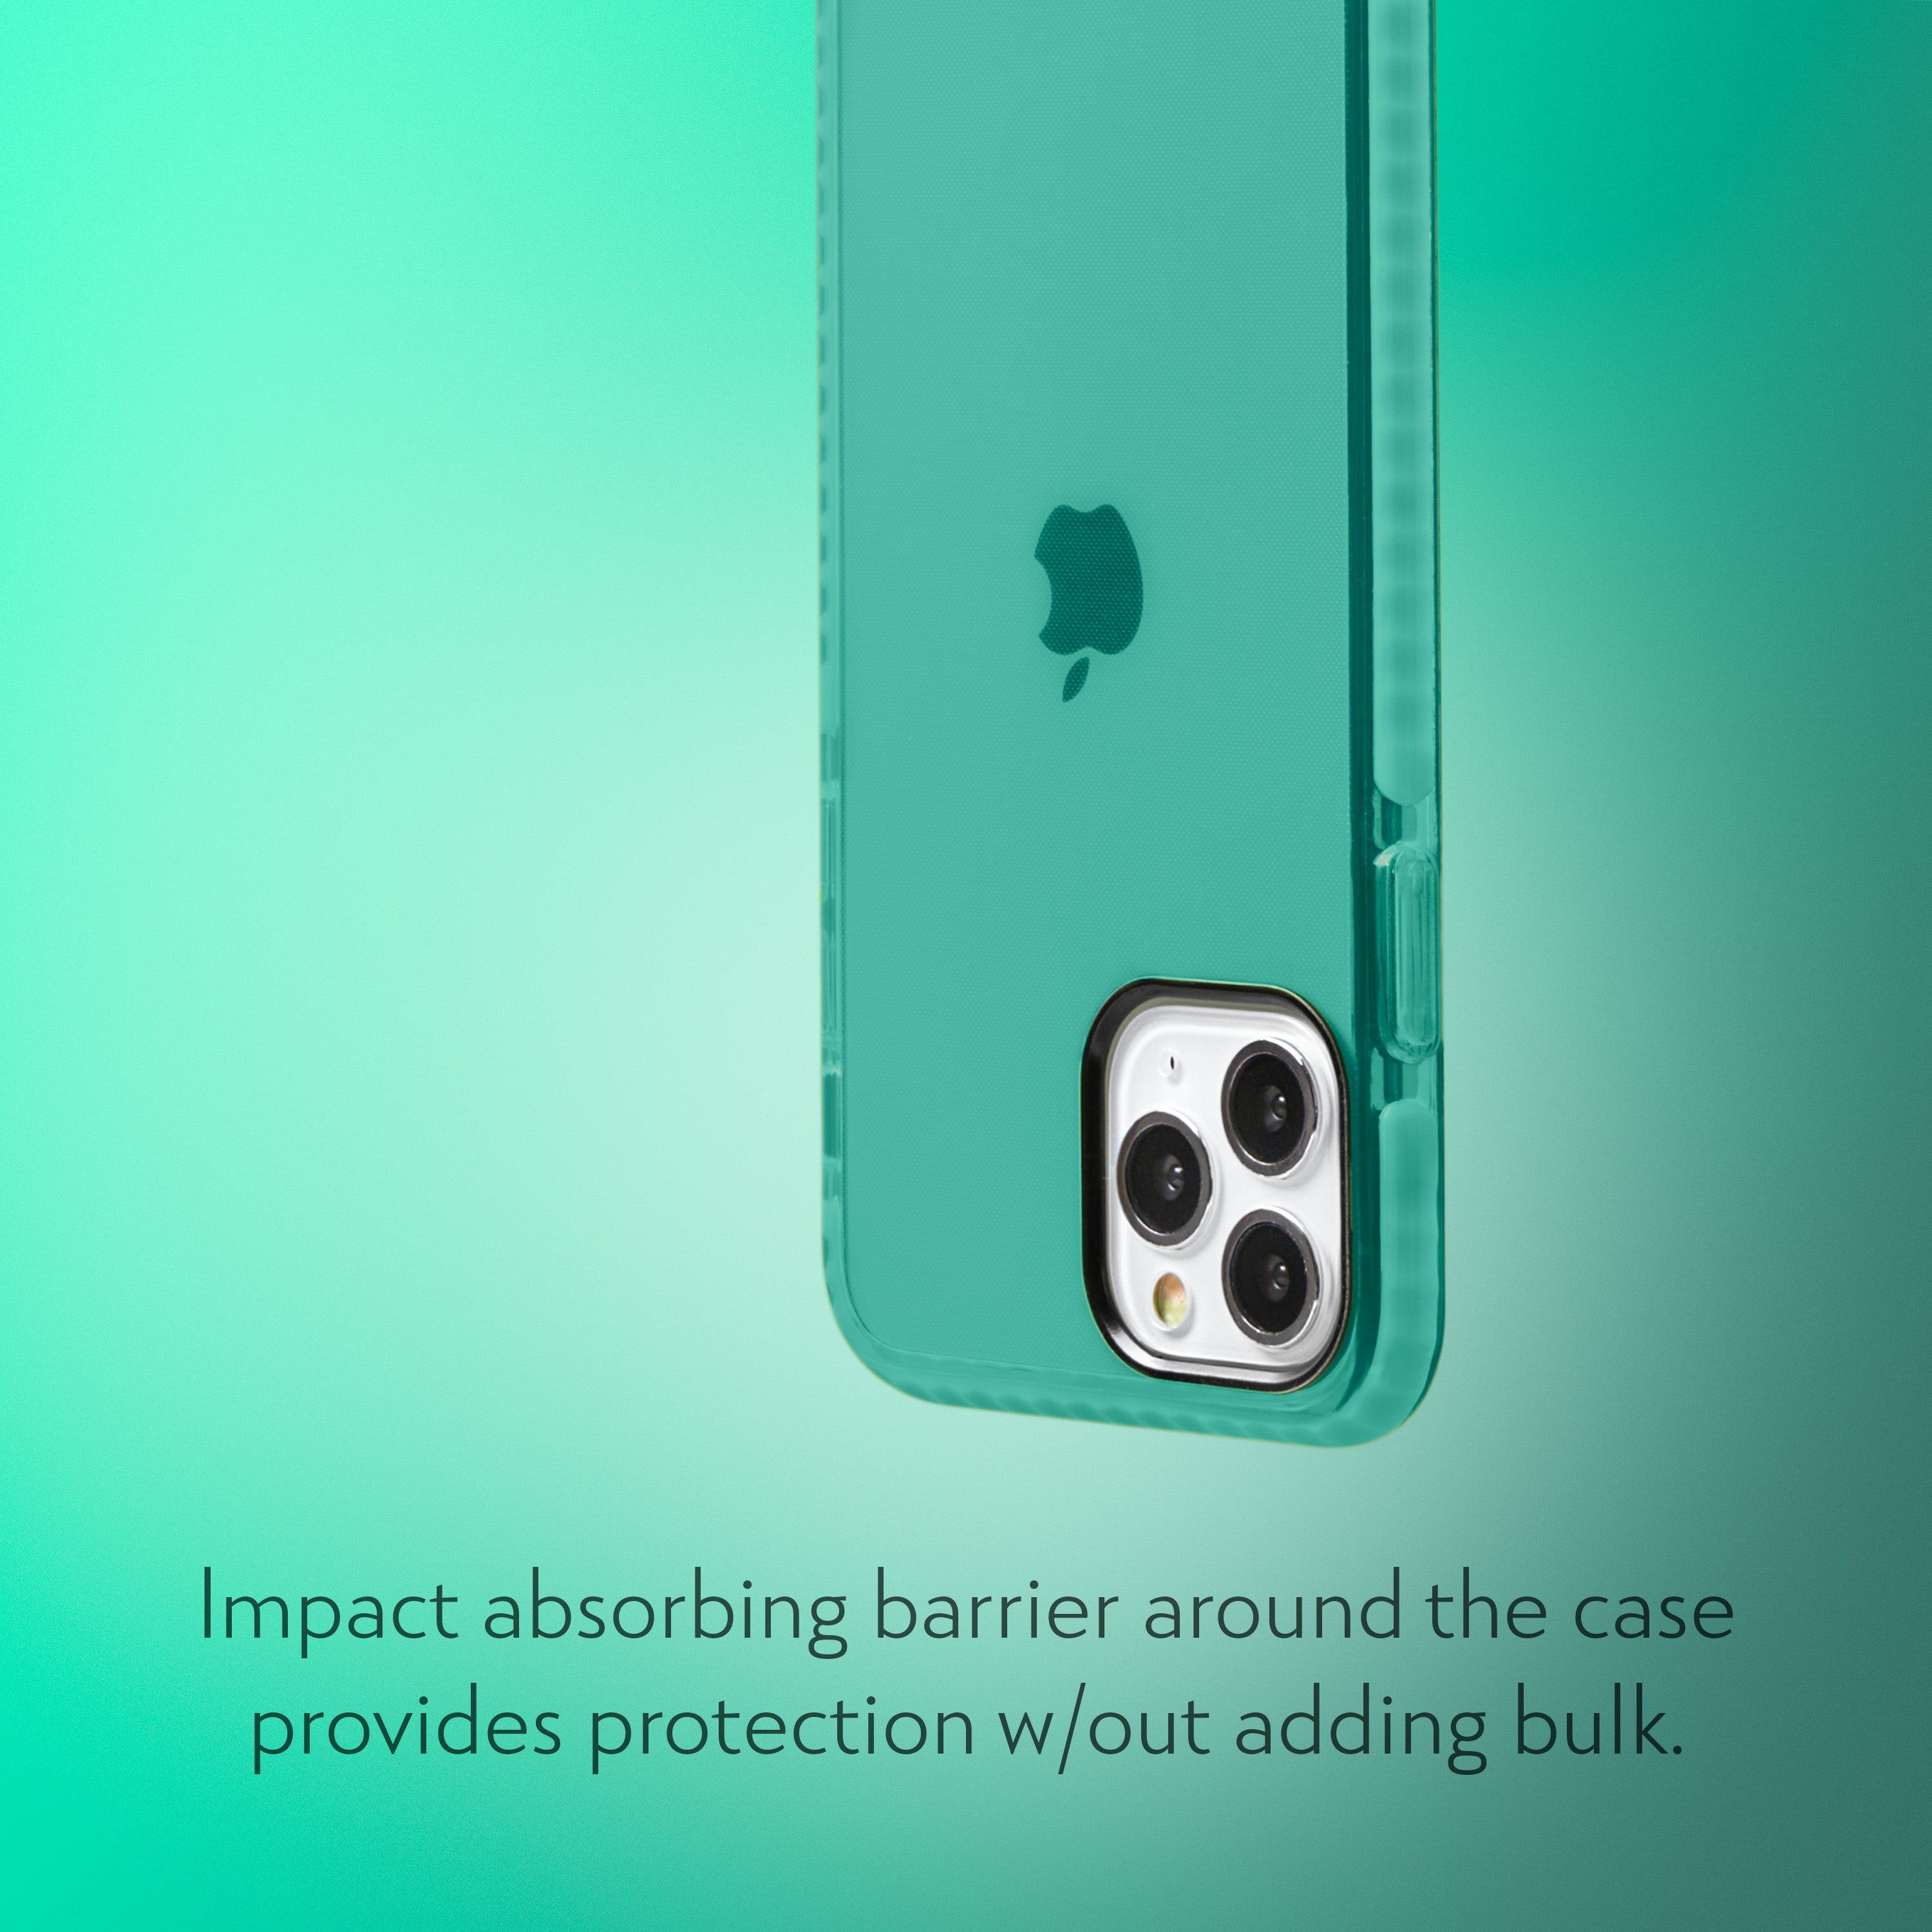 Barrier Case for iPhone 11 Pro - Polished Turquoise Blue